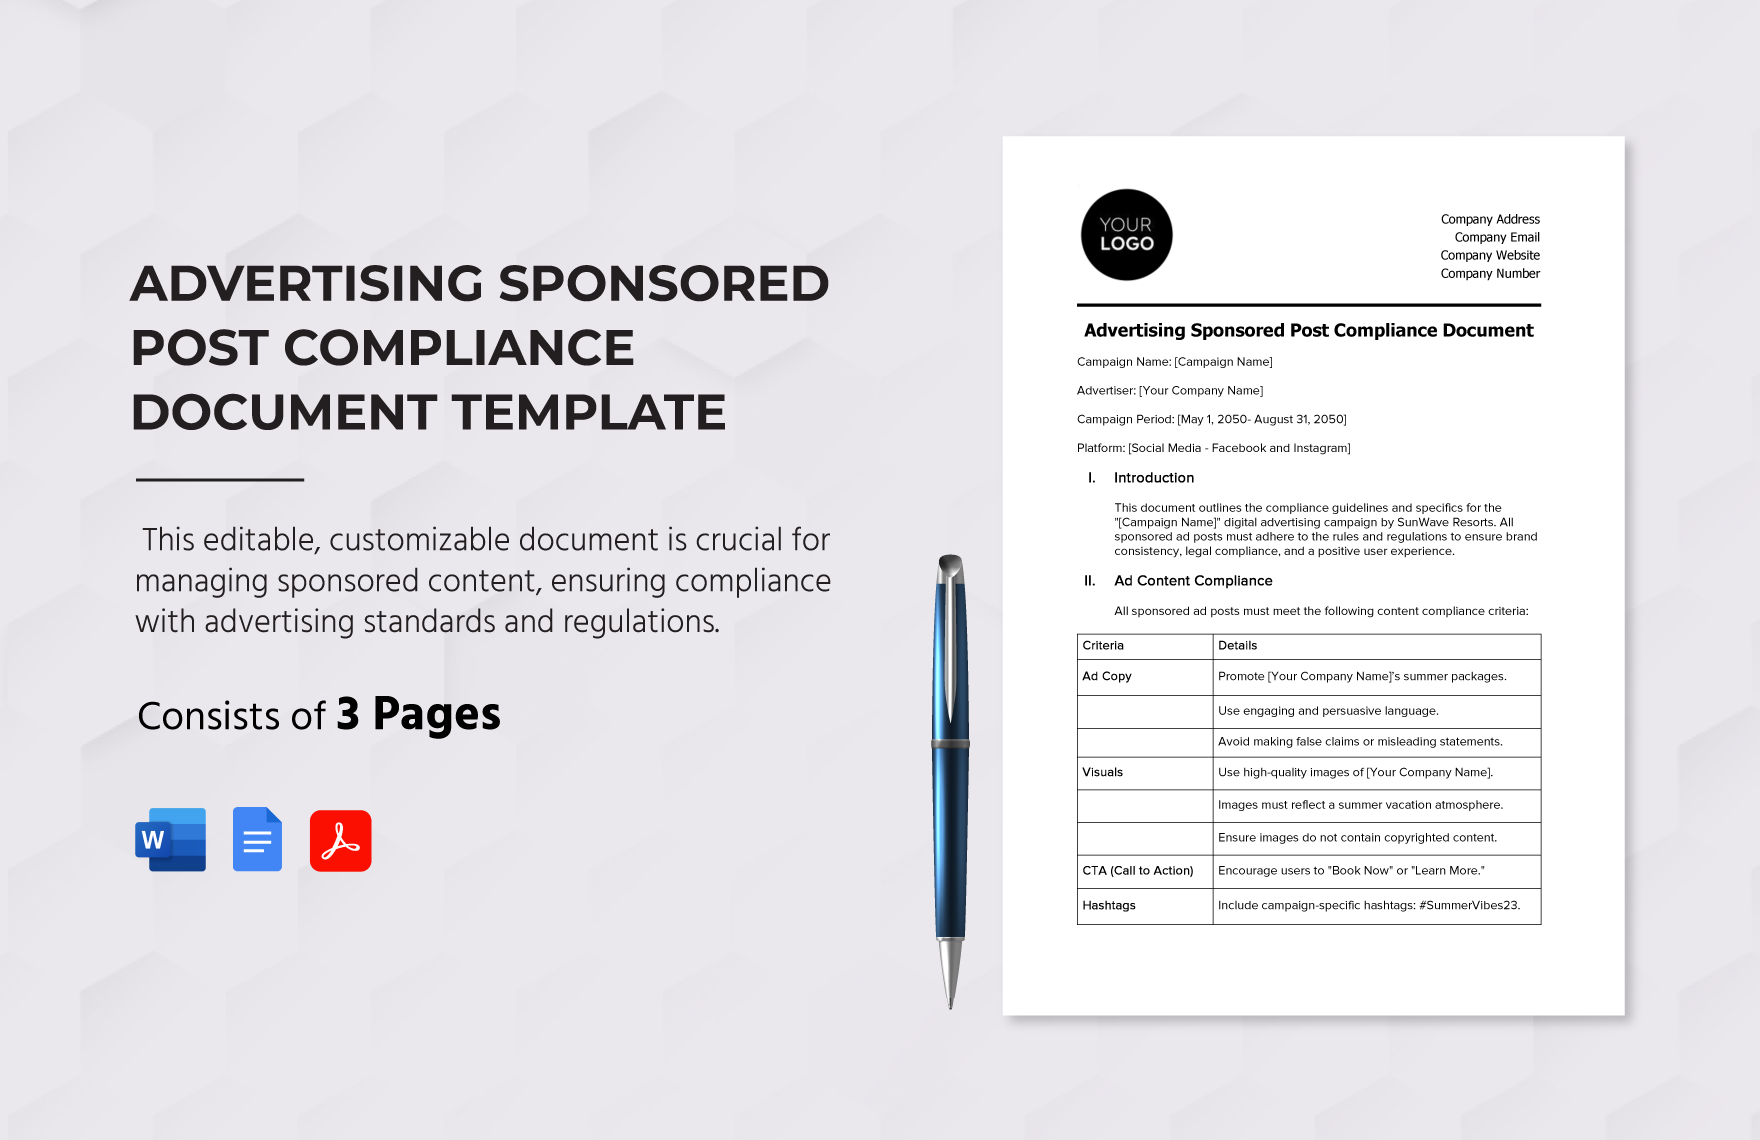 Advertising Sponsored Post Compliance Document Template in Word, Google Docs, PDF